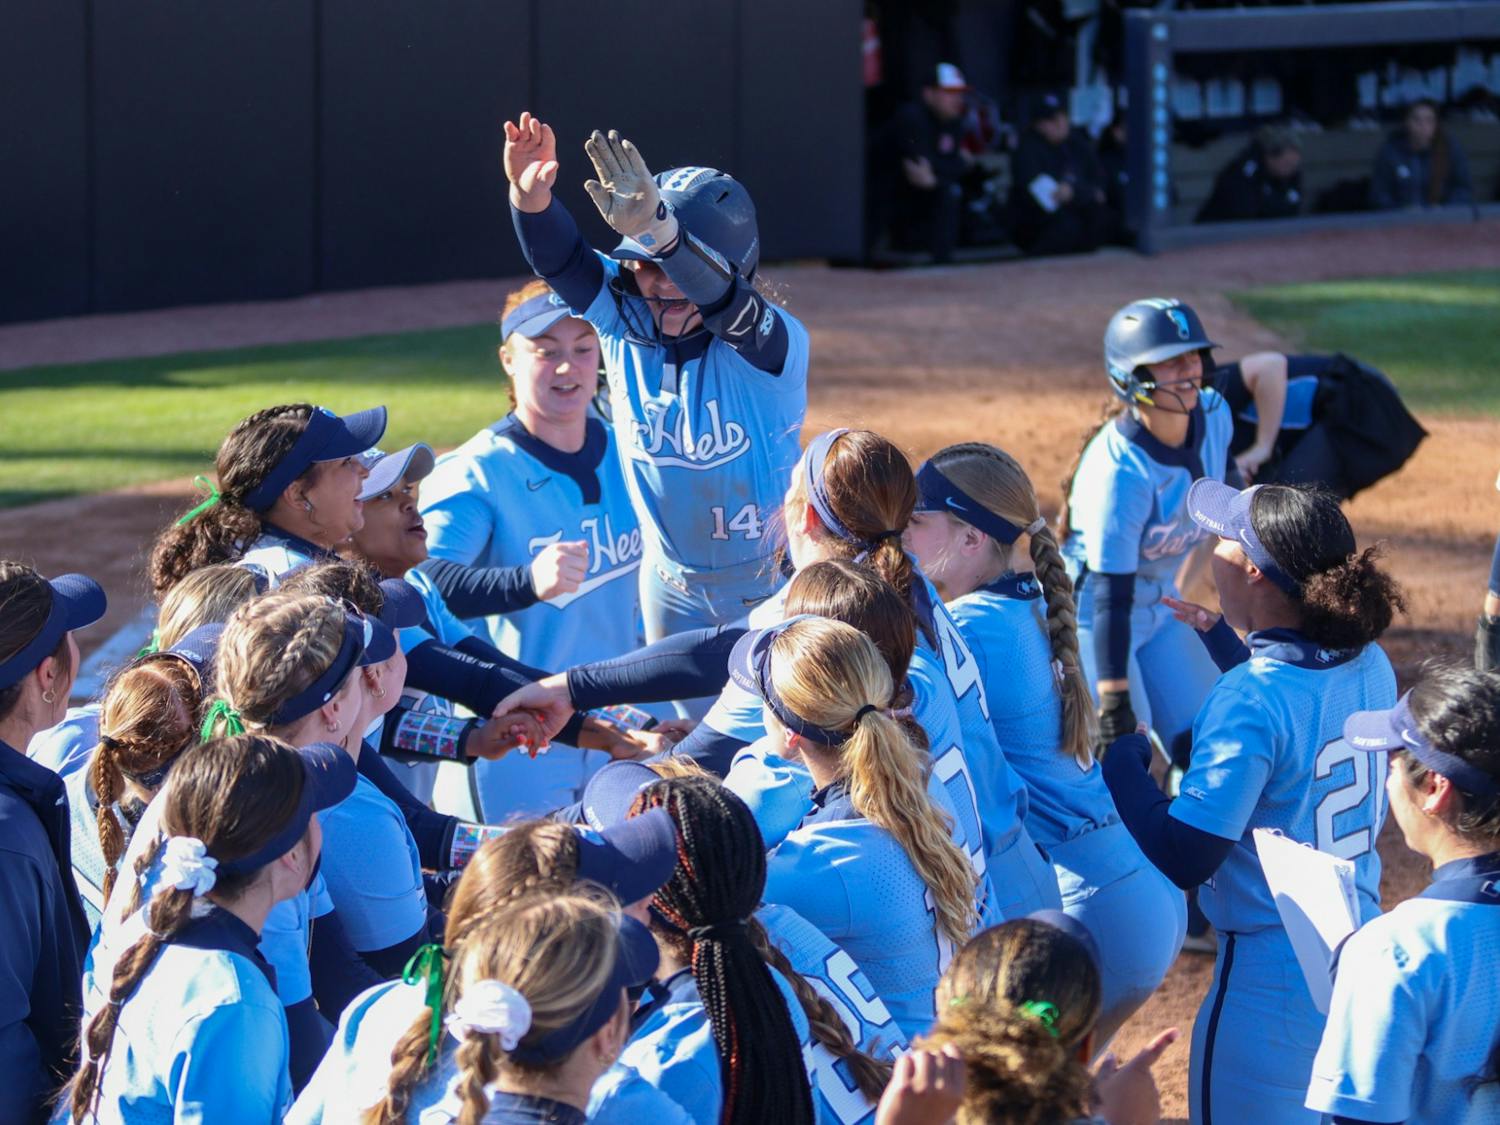 The team celebrates a home run from utility player Kianna Jones (44). UNC beat NC State 16-4 at home on Sunday, March 27, 2022.